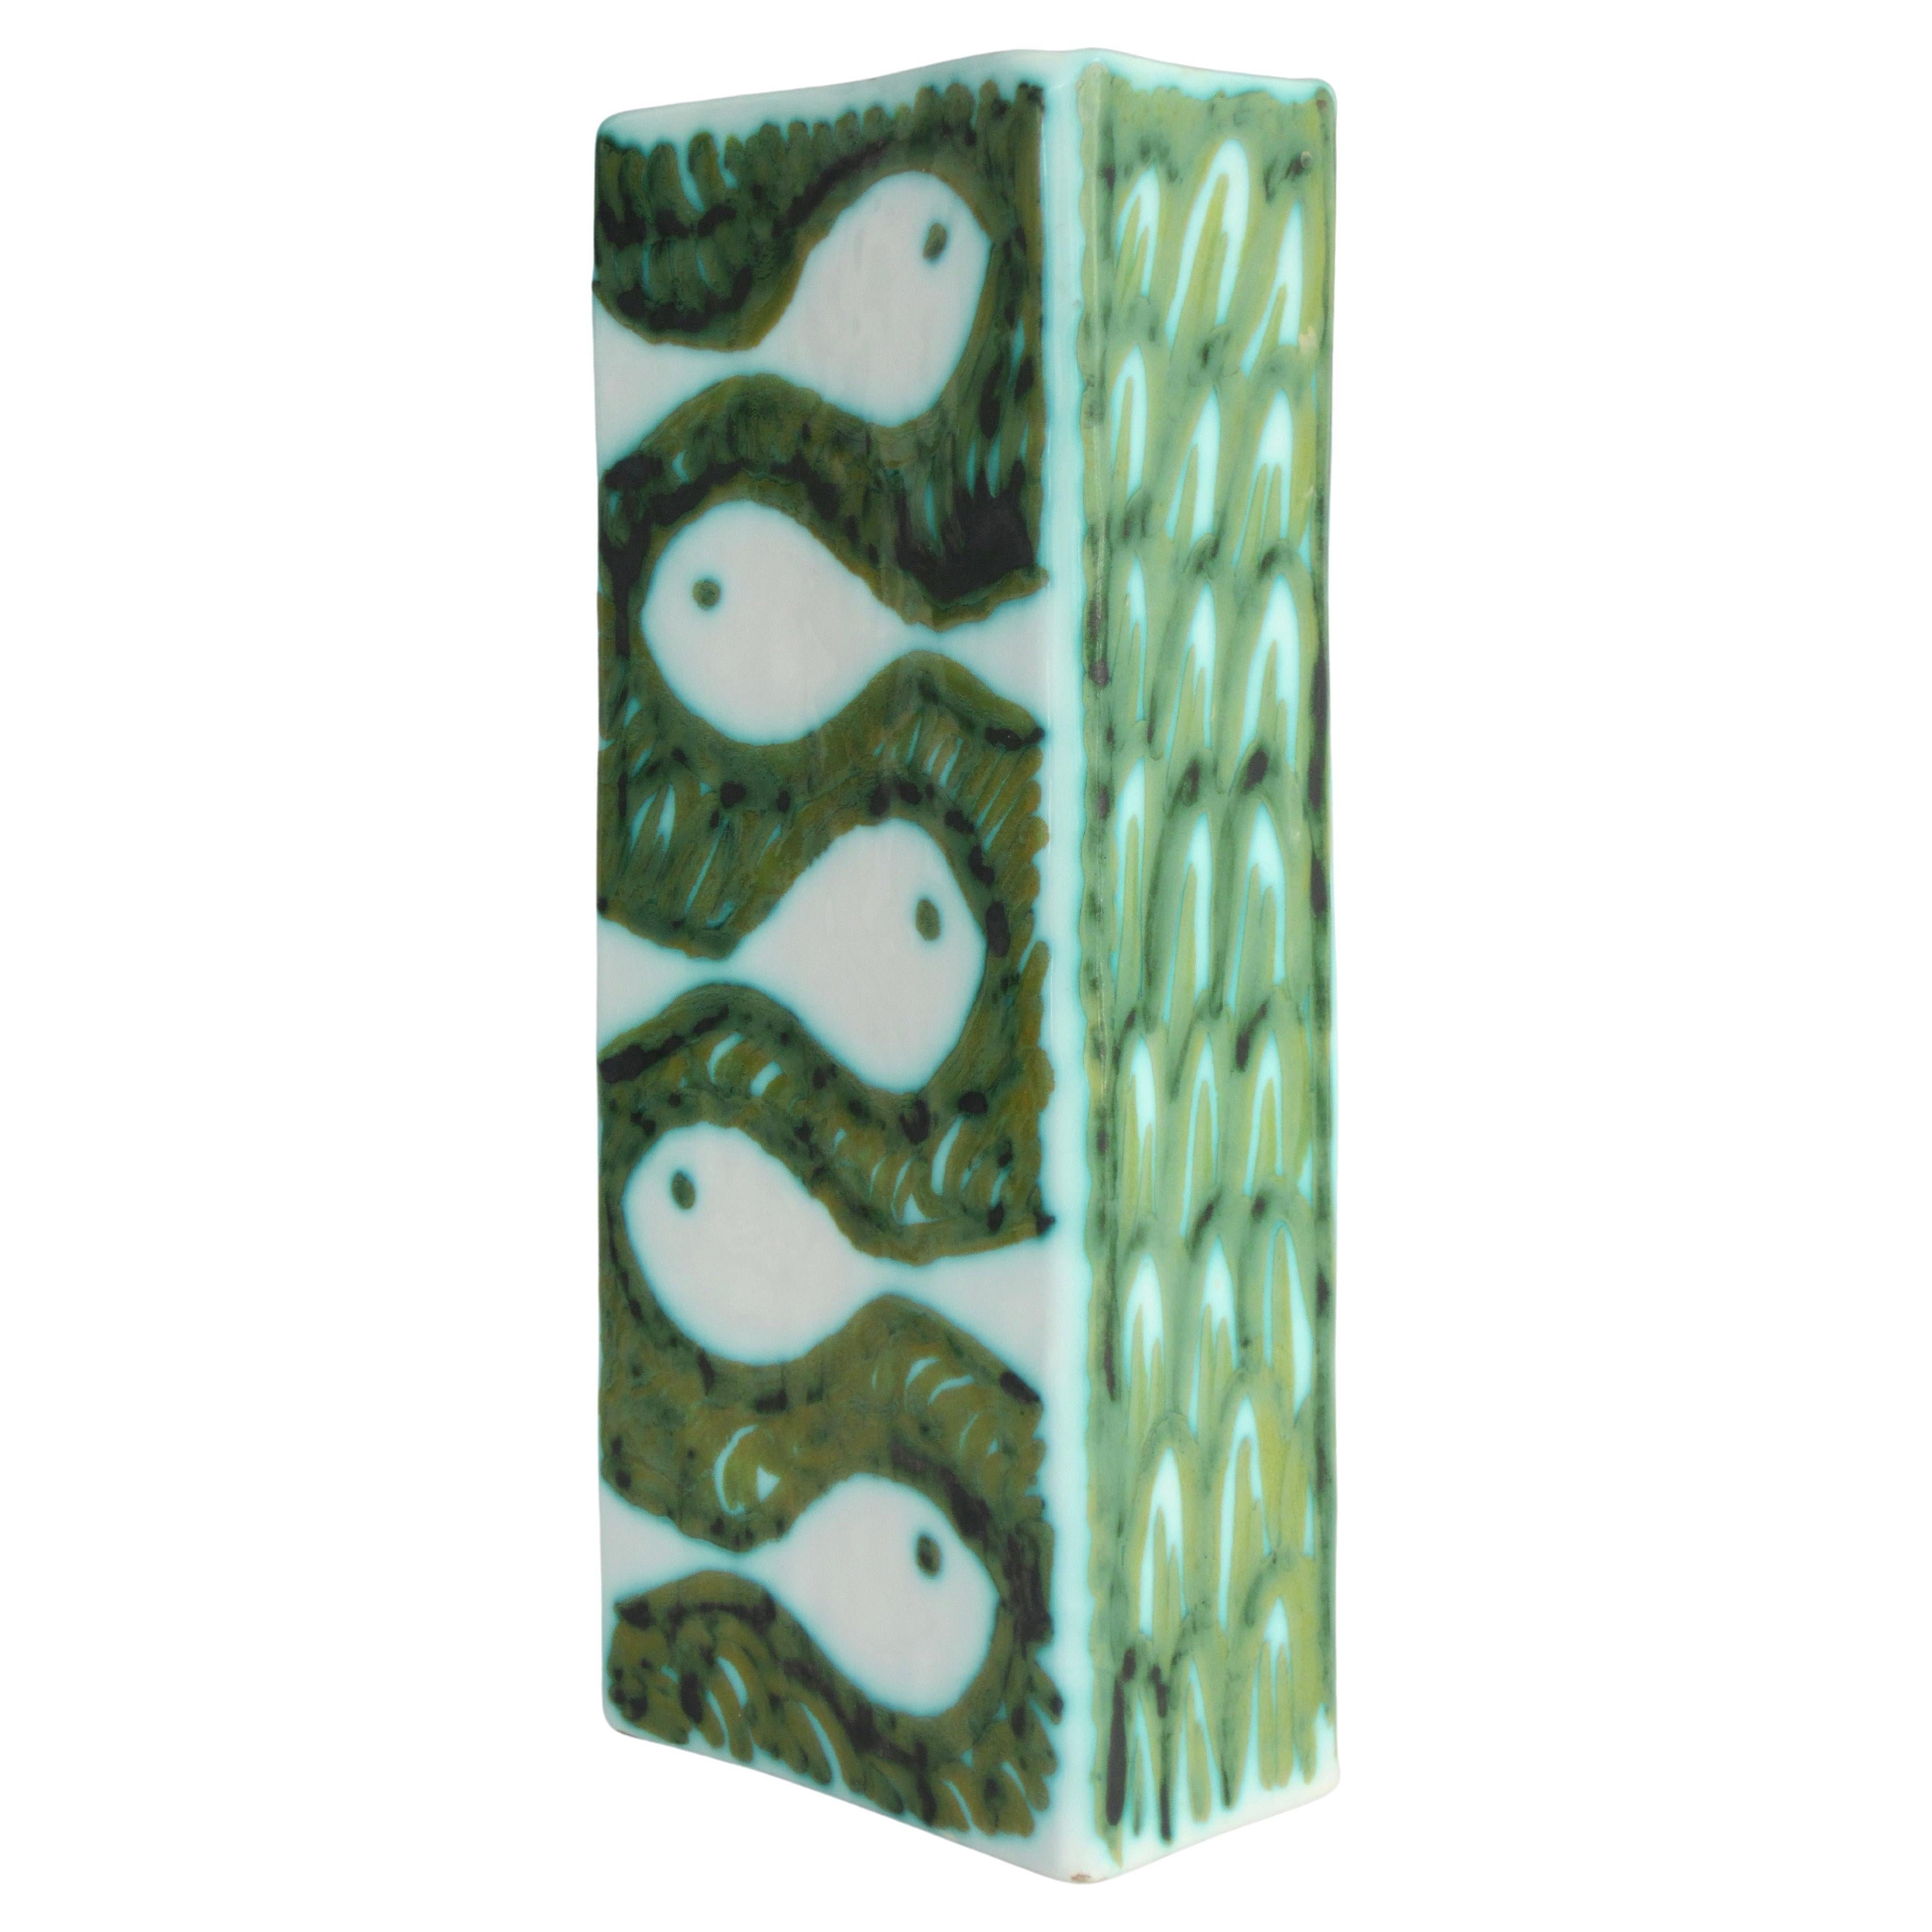 Alessio Tasca for Raymor Double Sided Rectangular Ceramic Vase For Sale